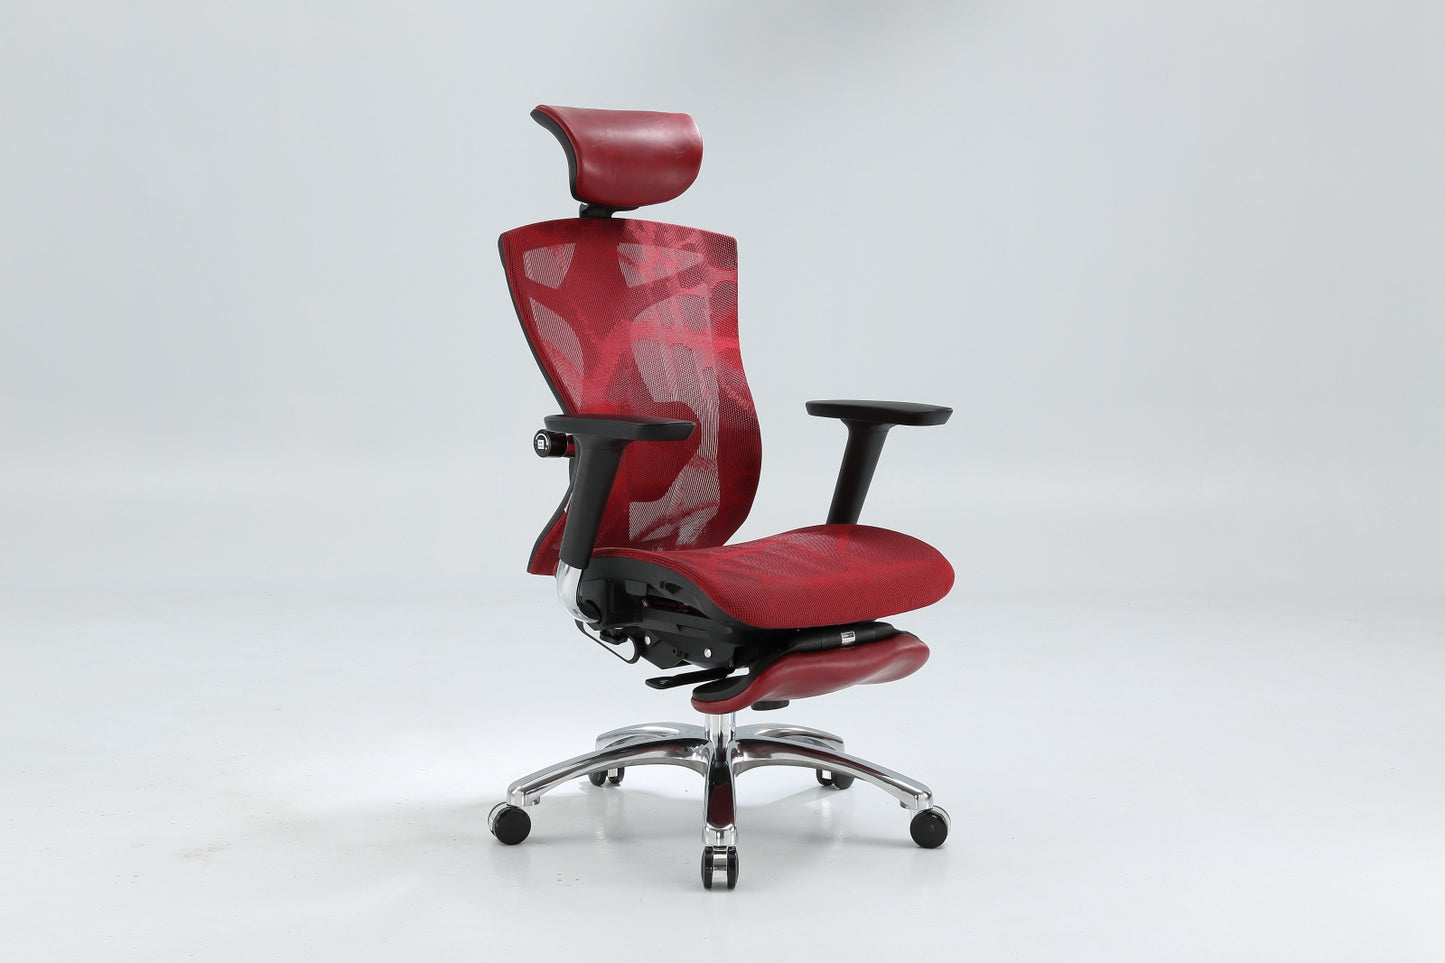 Sihoo V1 Limited Edition (with built-in footrest)